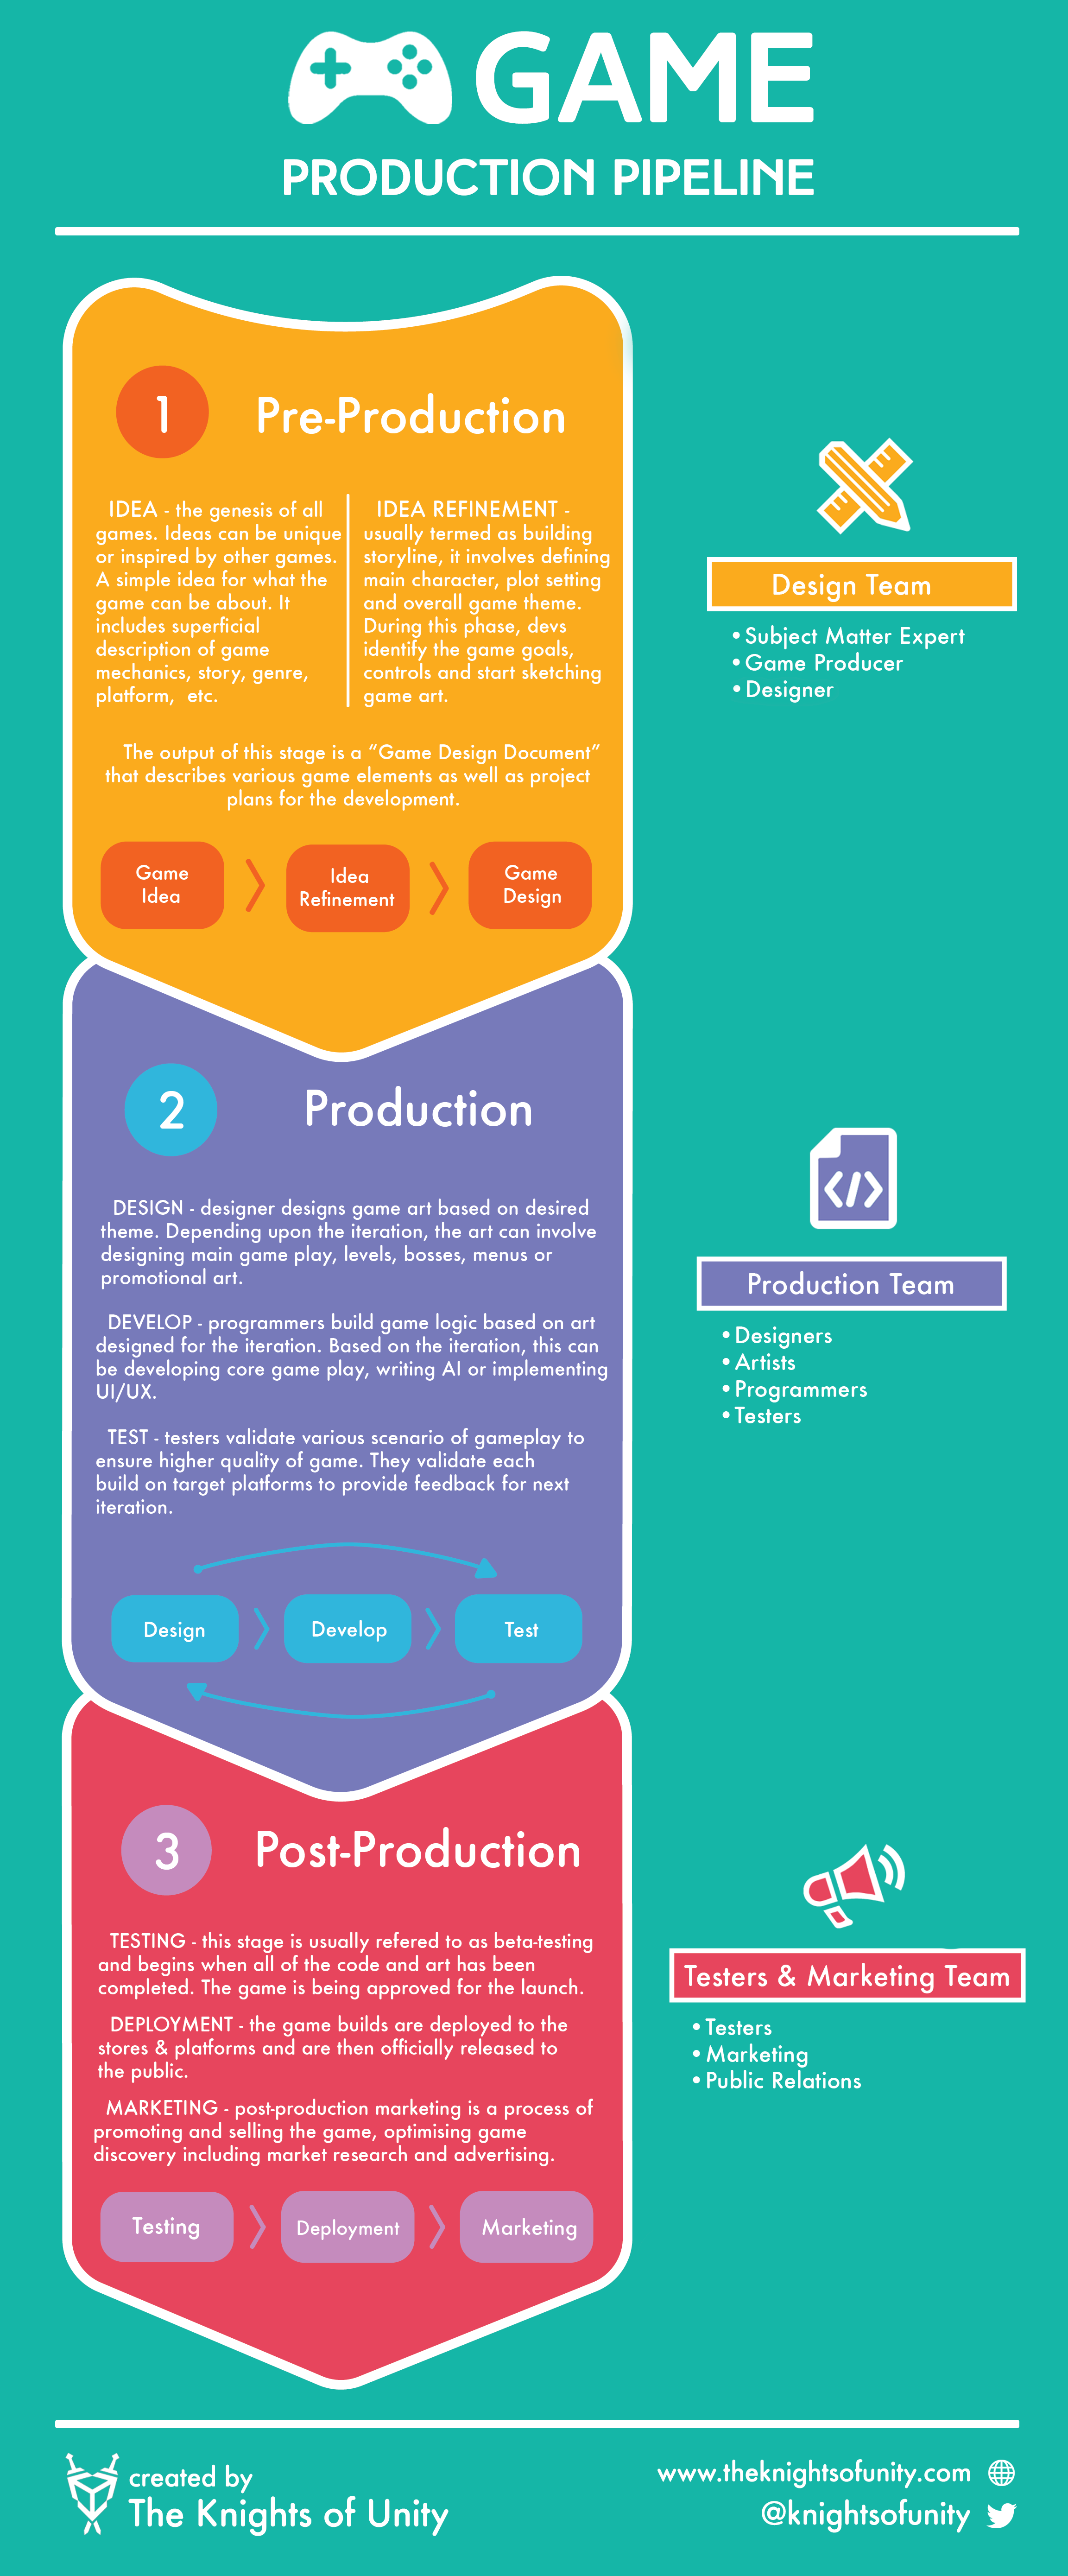 Game Production Pipeline Infographic - Game Design, Game Development, QA Testing, and Launching the game marketing plan.